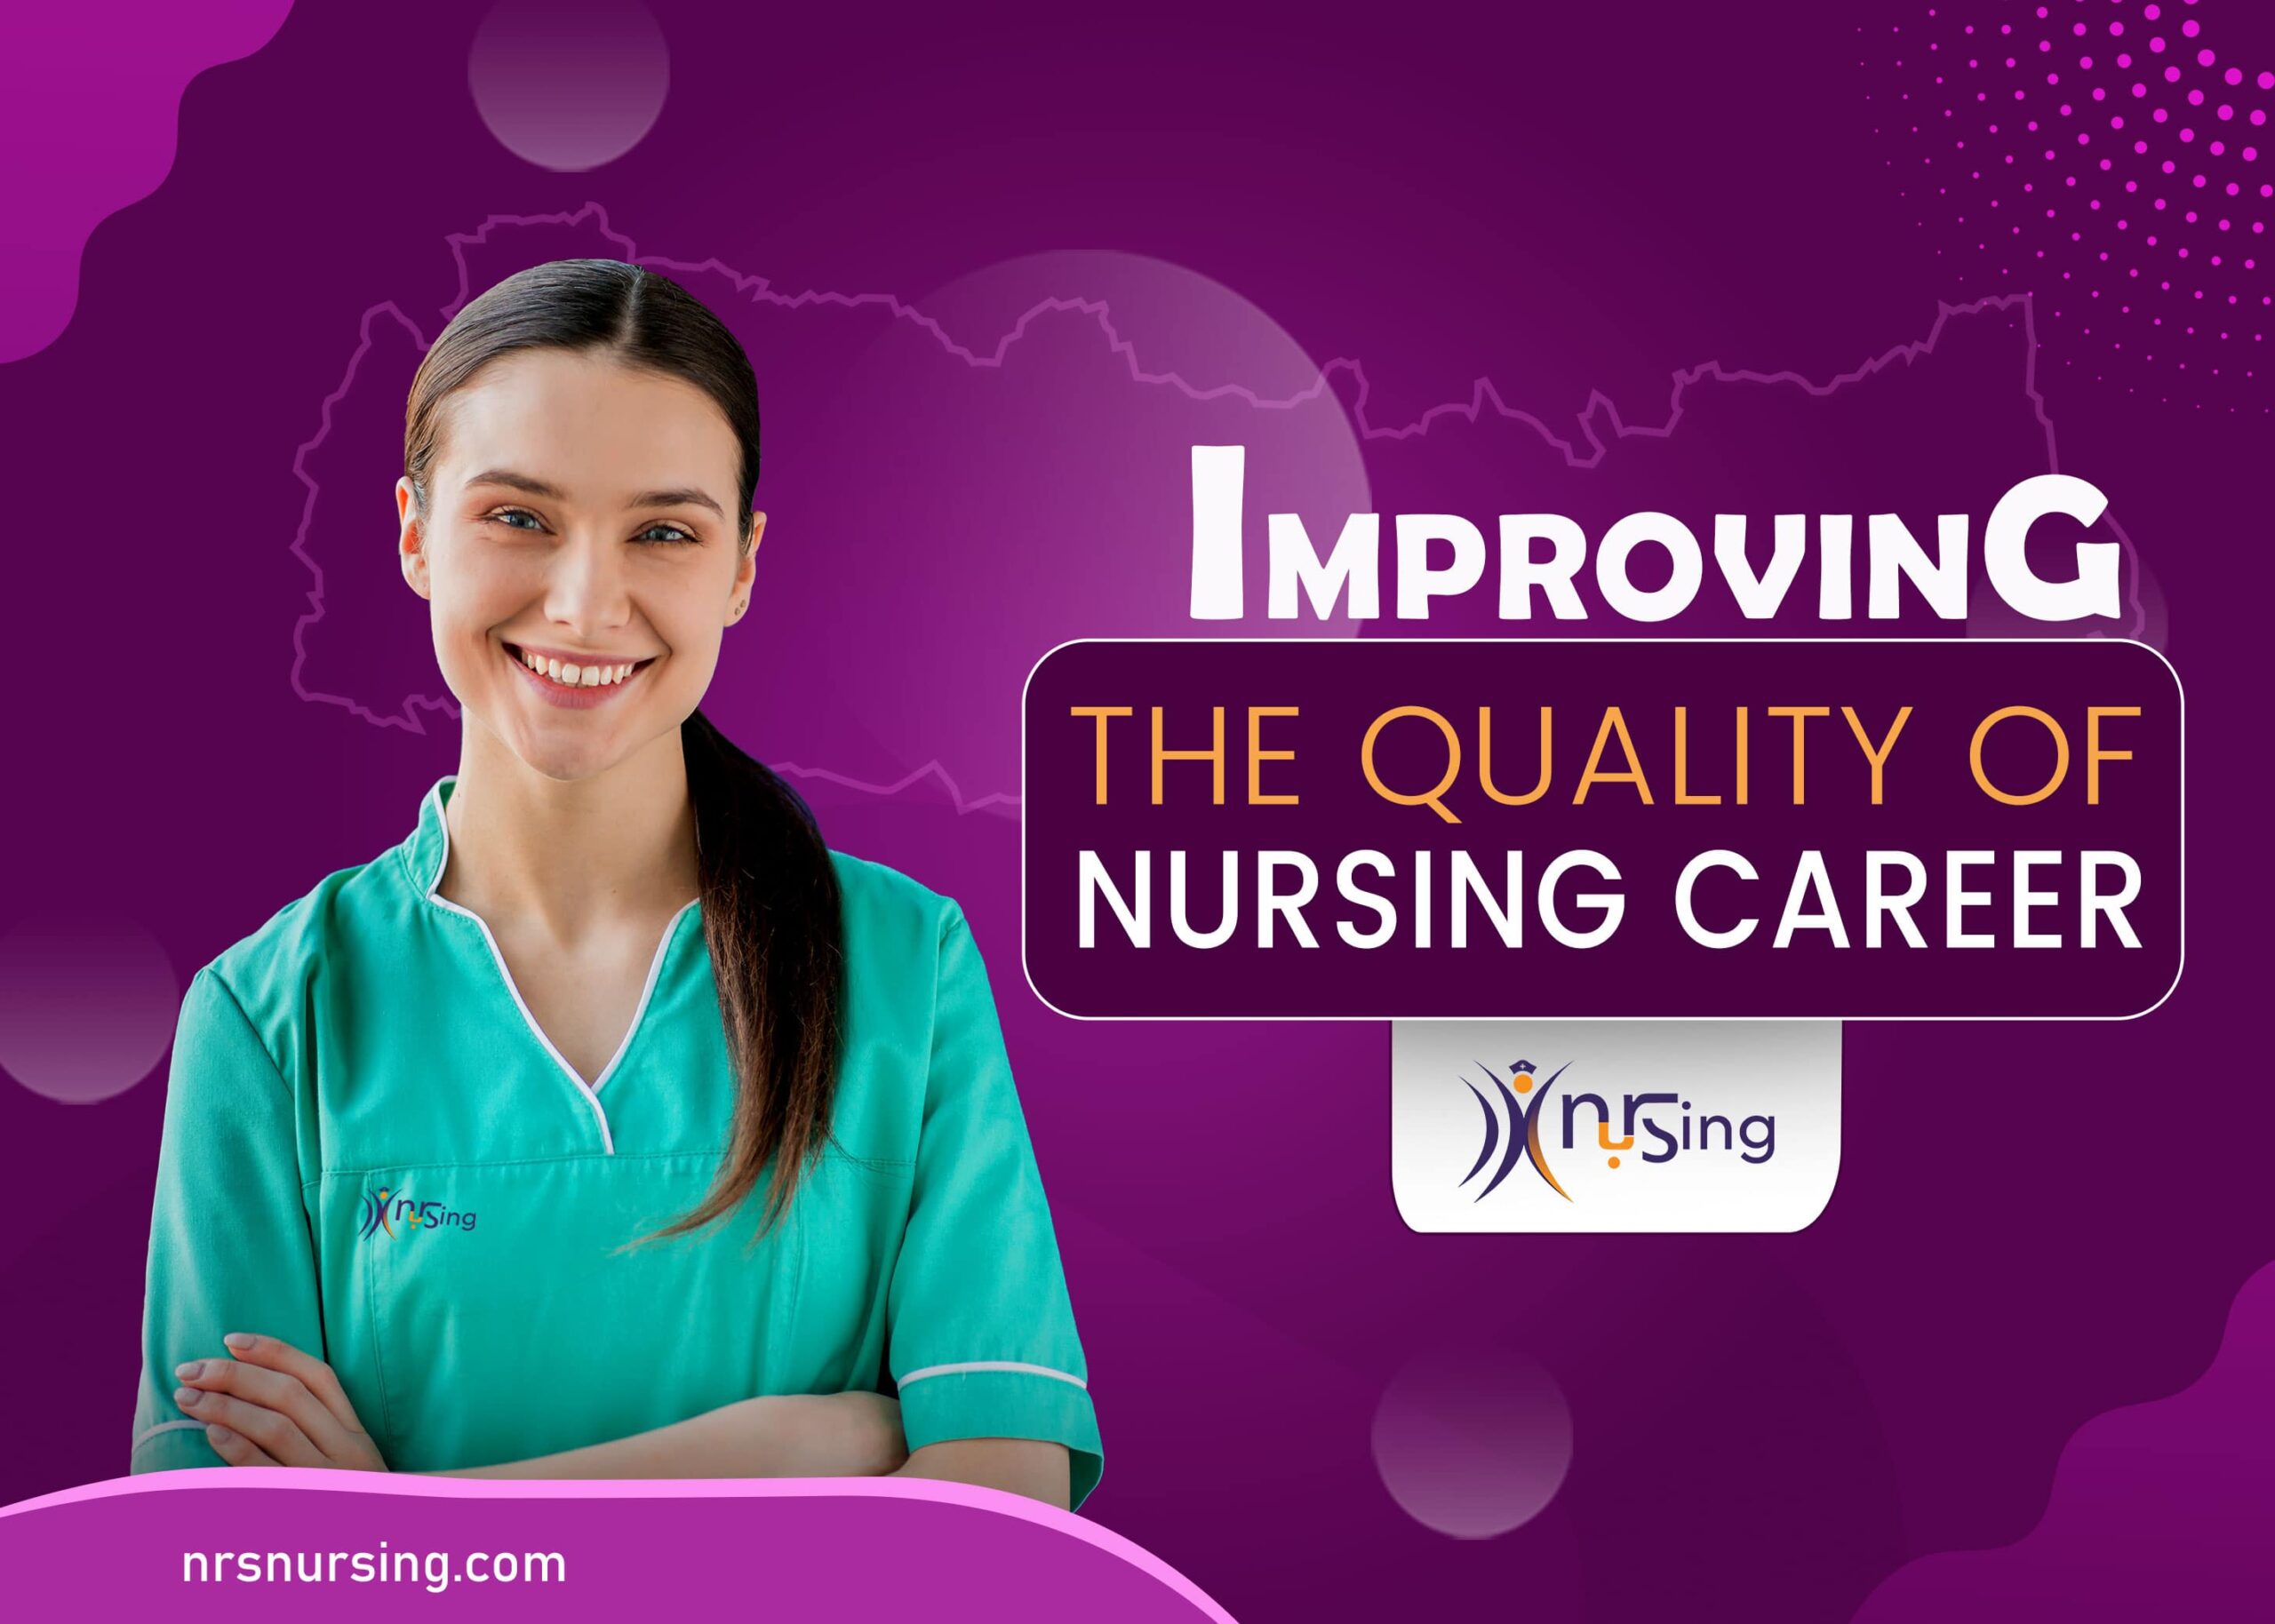 Improving the quality of nursing career in Nepal